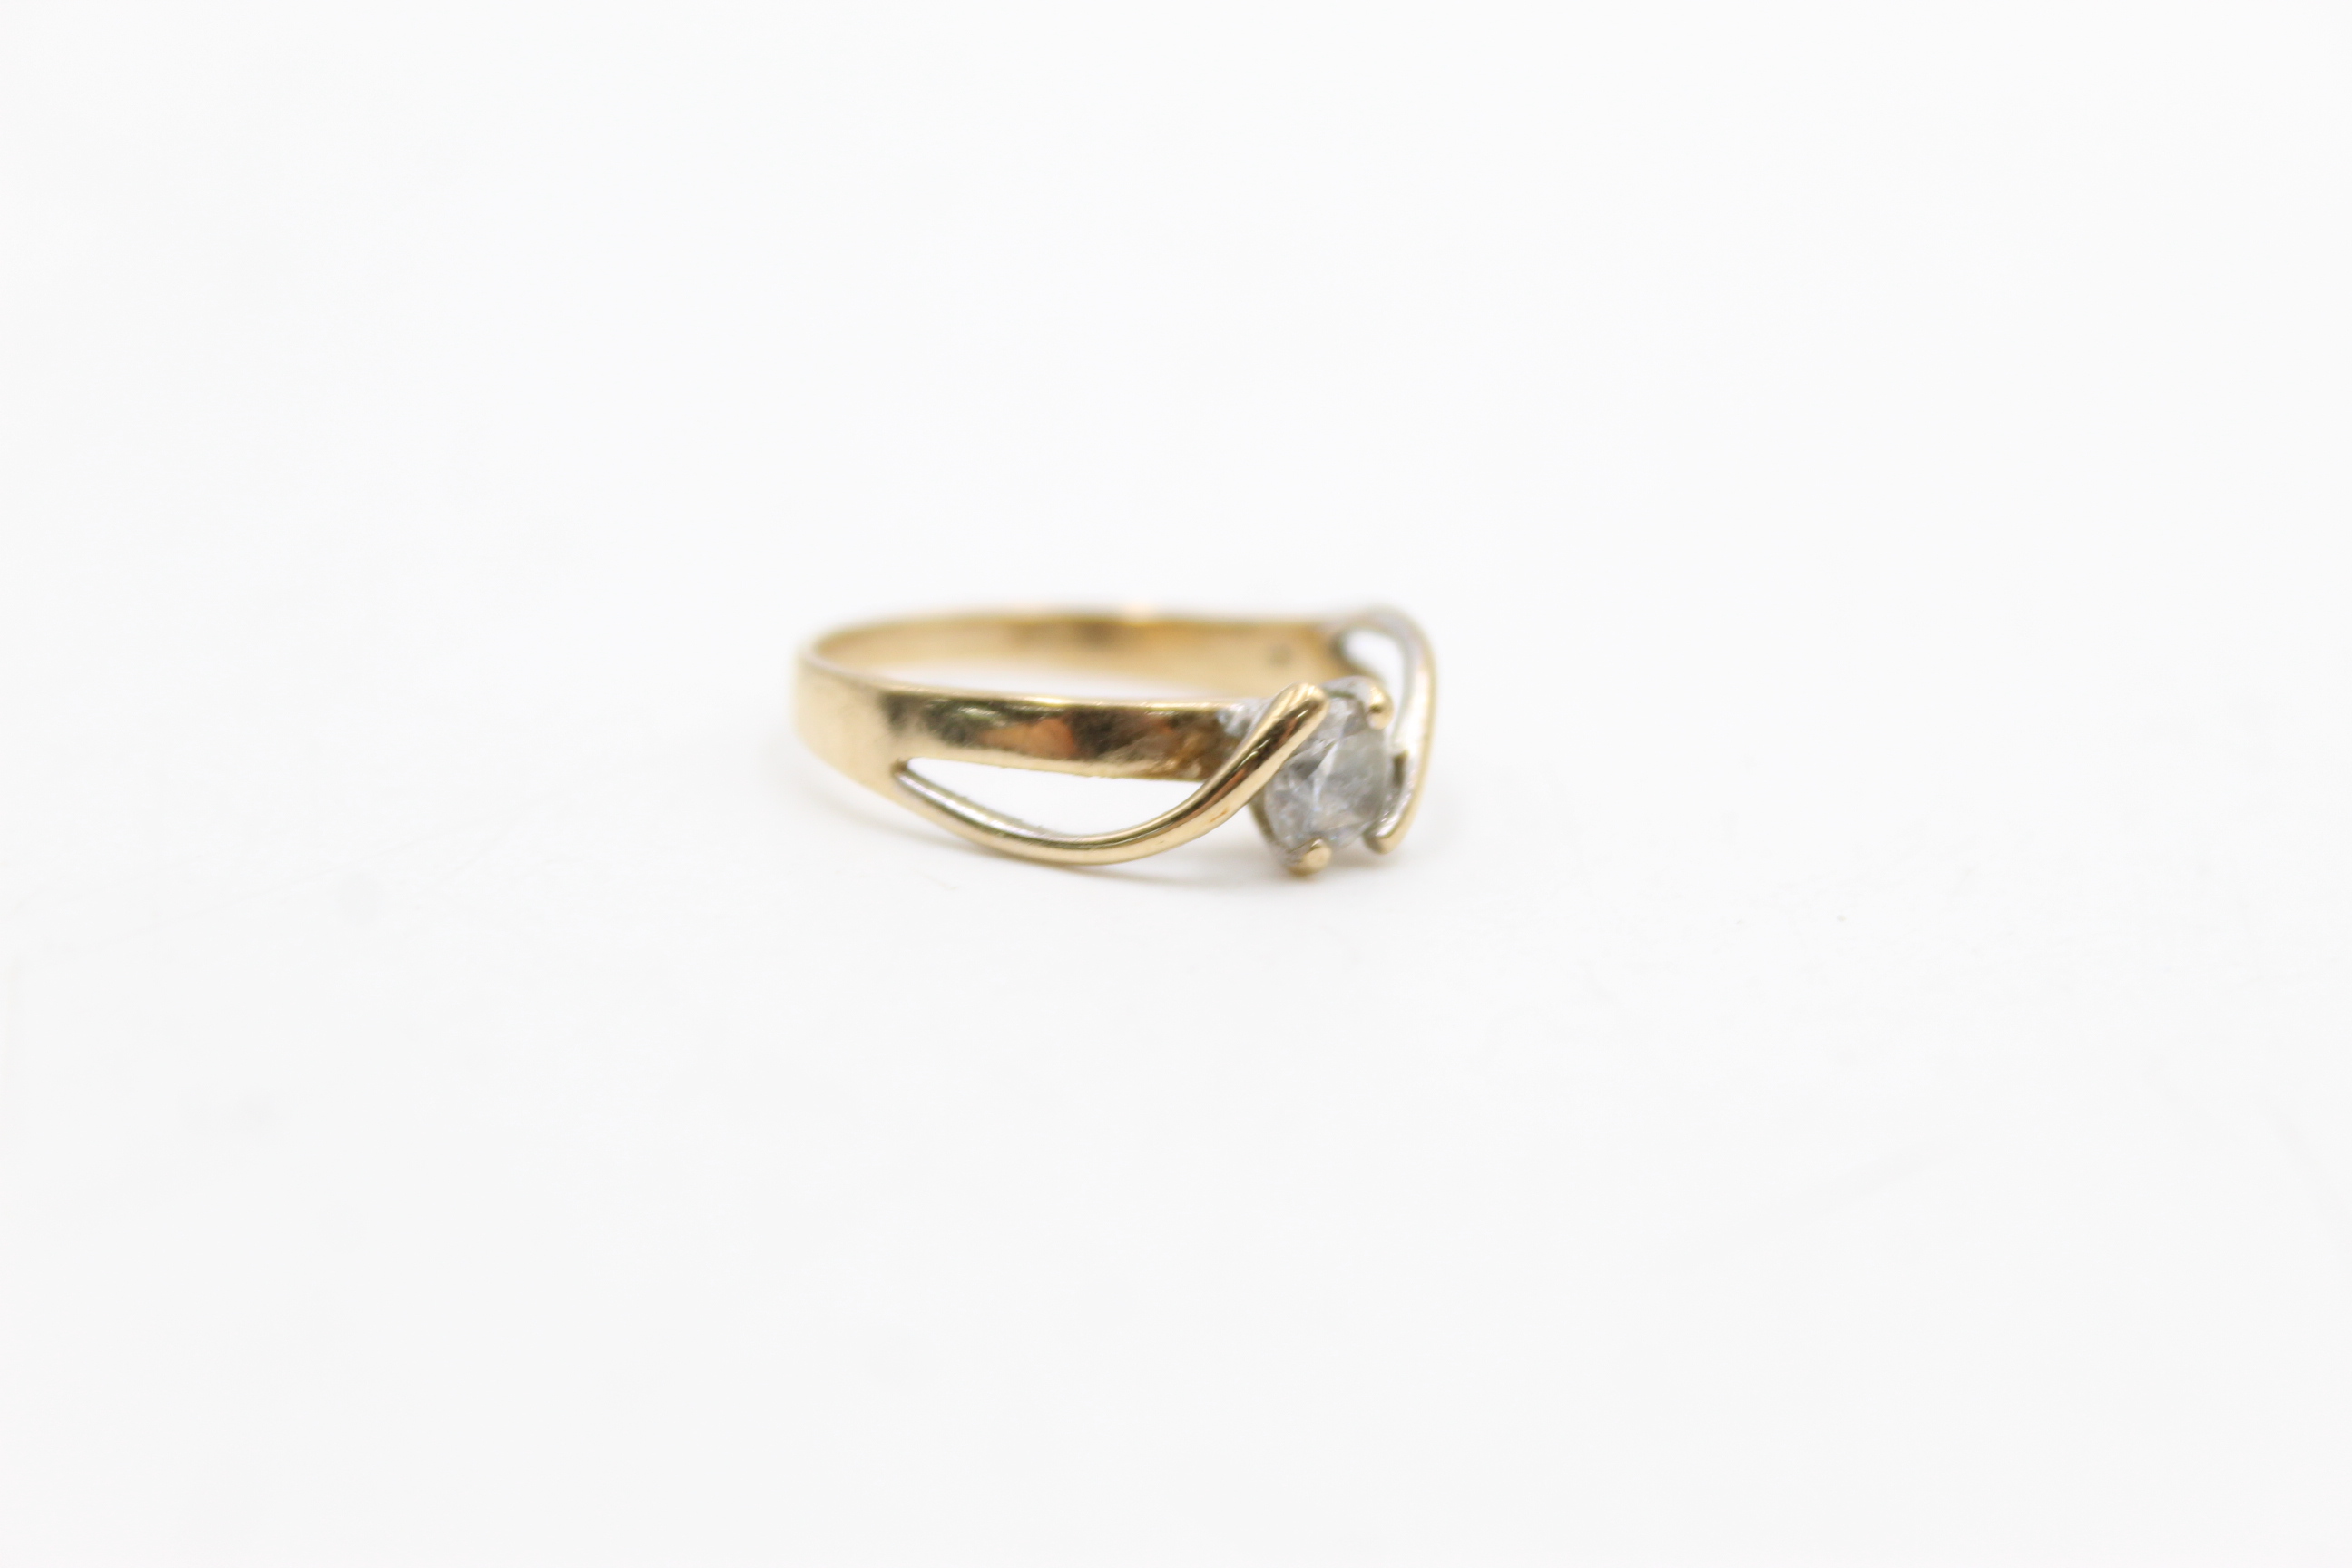 9ct gold clear gemstone solitaire twist setting ring (2.4g) - Image 3 of 8